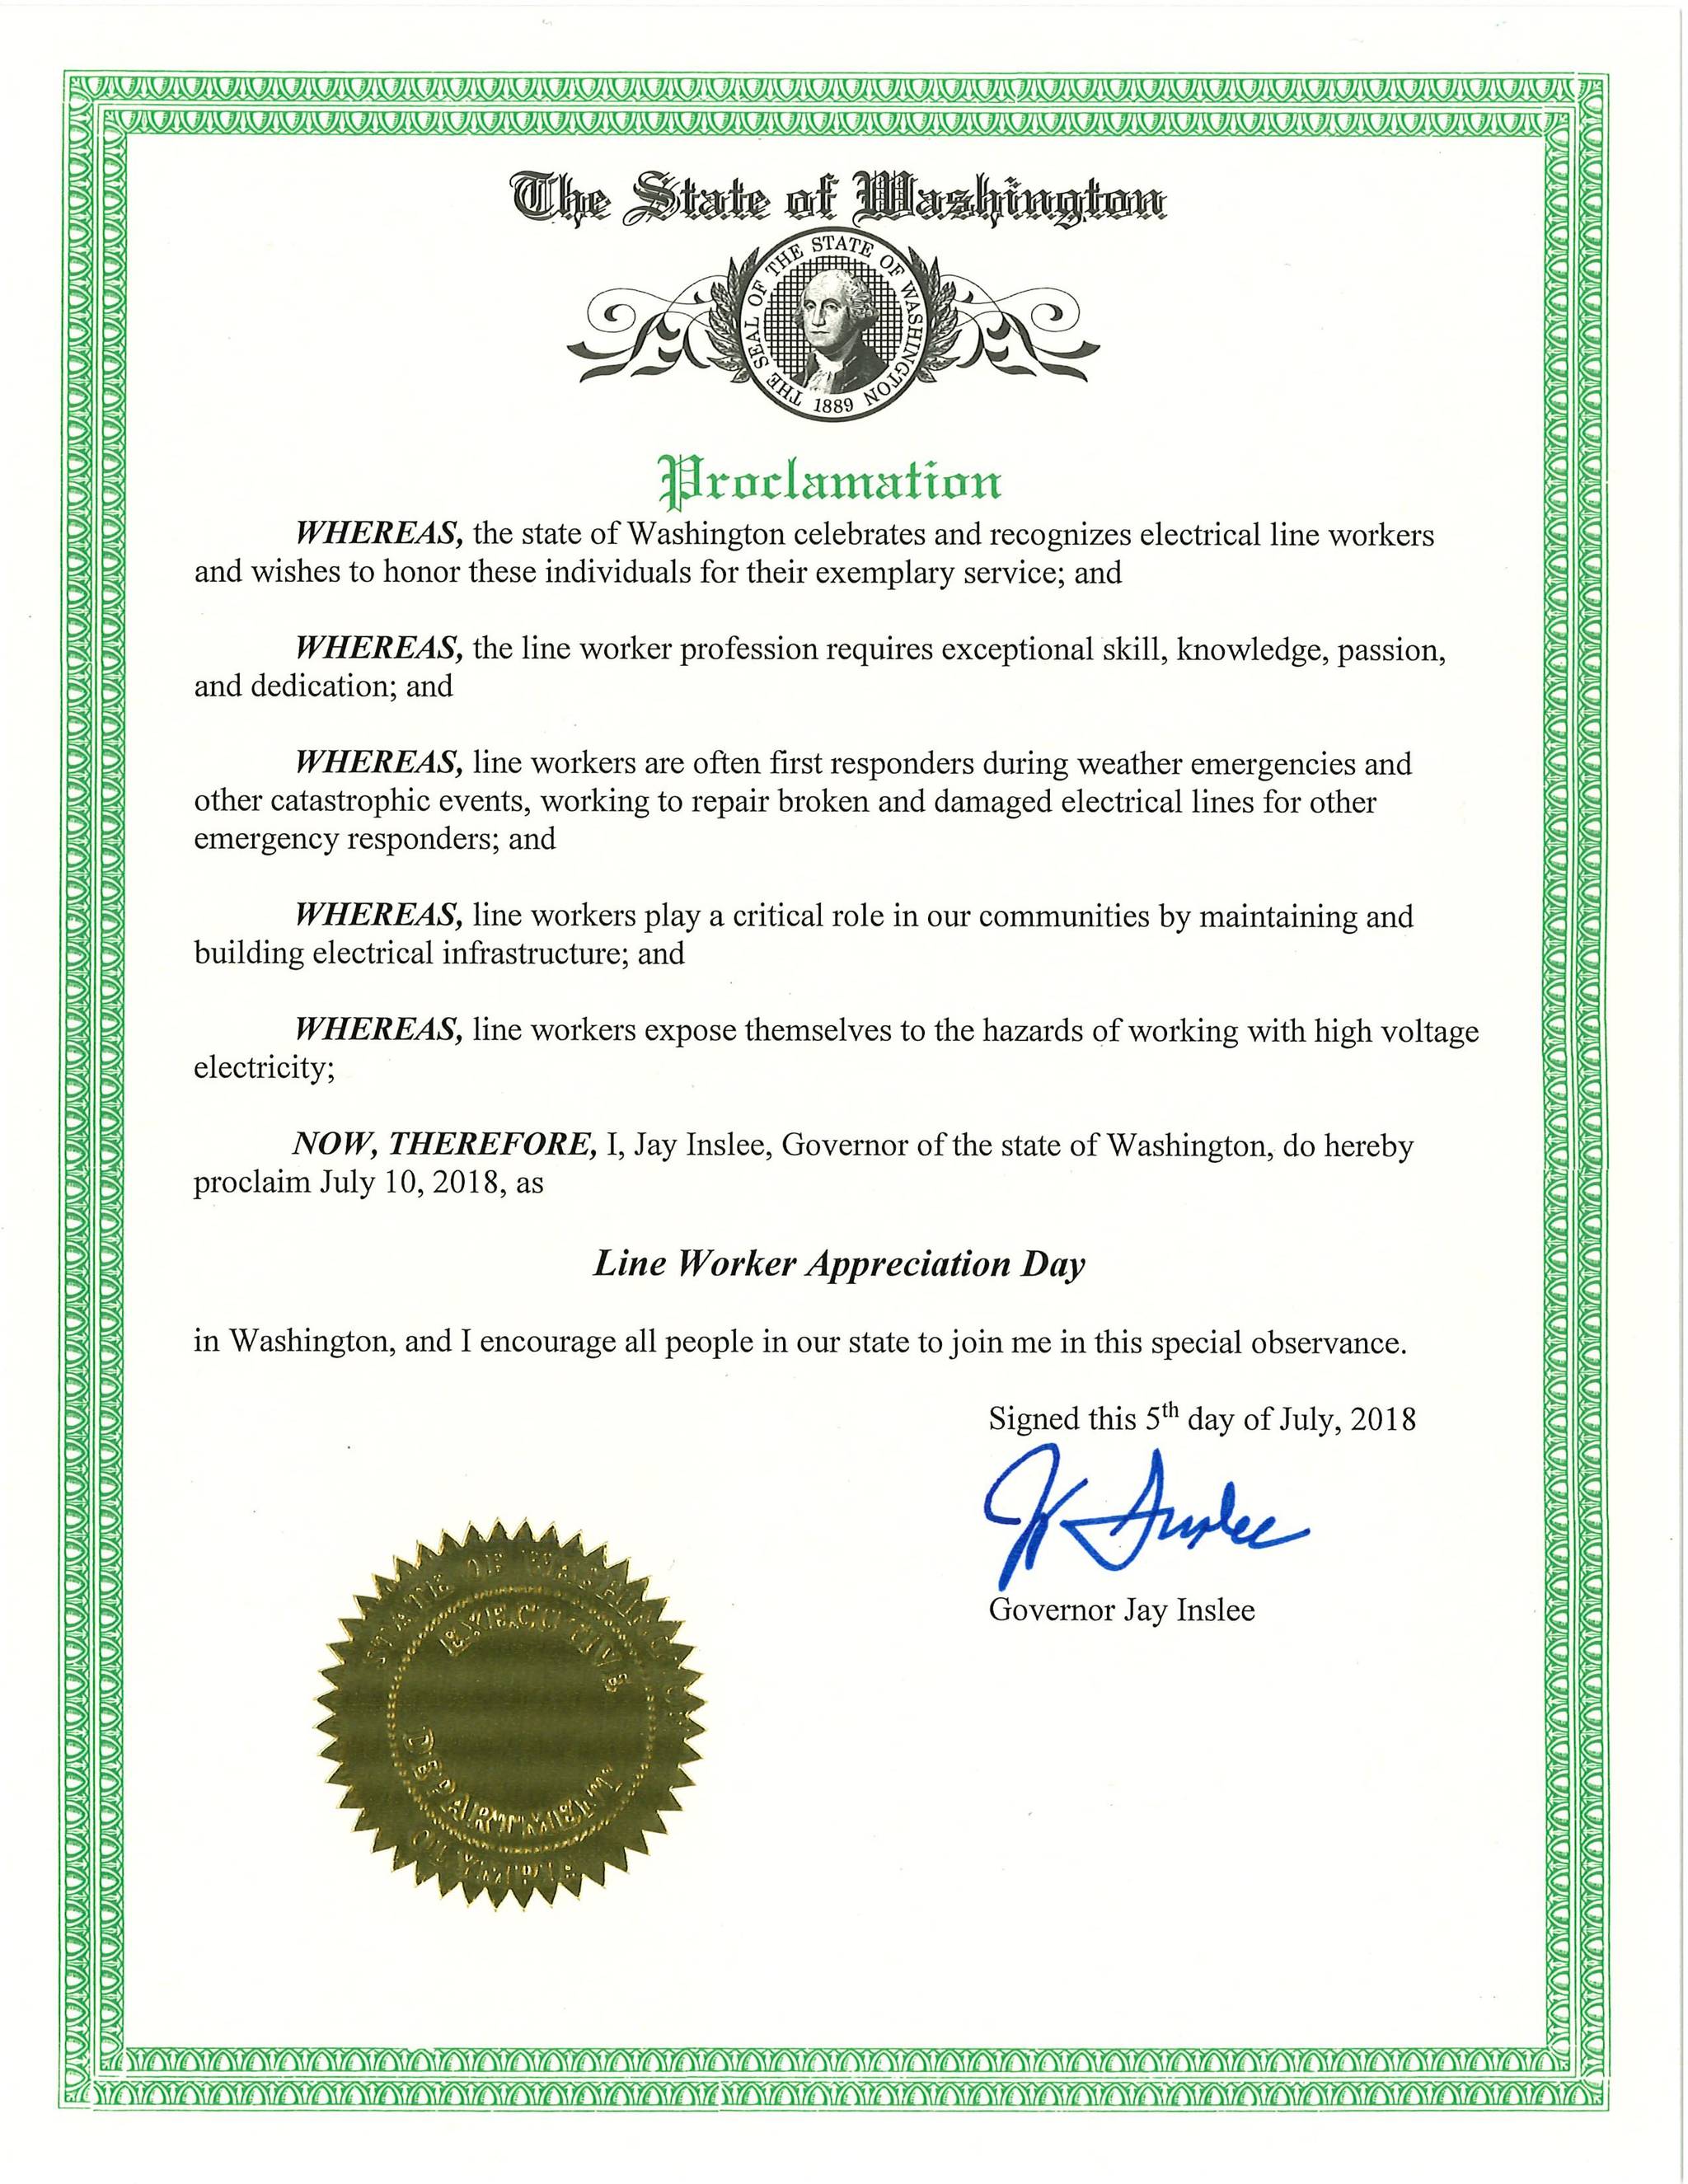 Gov. Inslee proclaims July 10 as Lineworker Appreciation Day